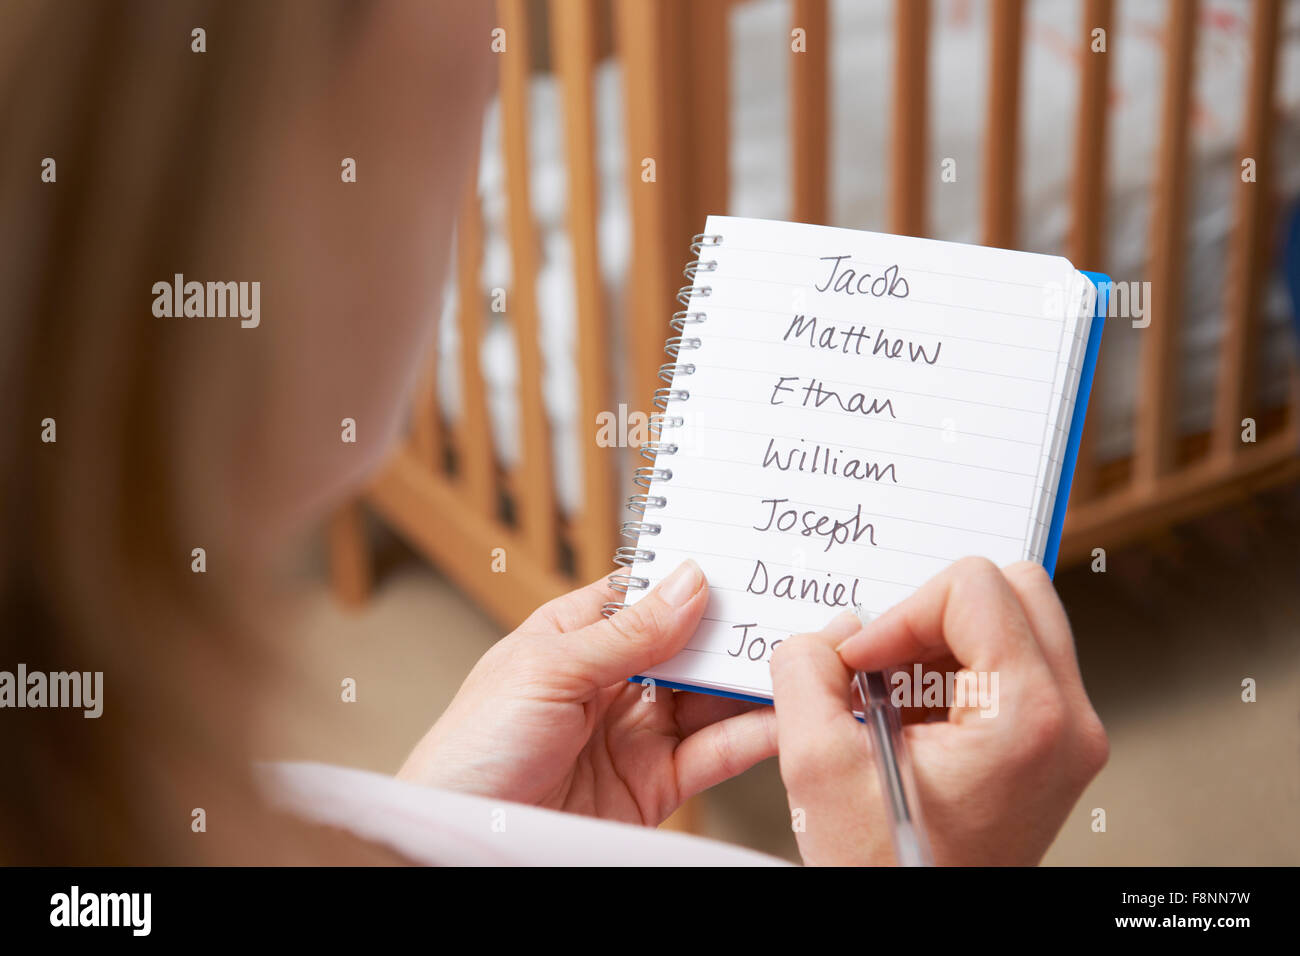 Woman Writing Possible Names For Baby Boy In Nursery Stock Photo